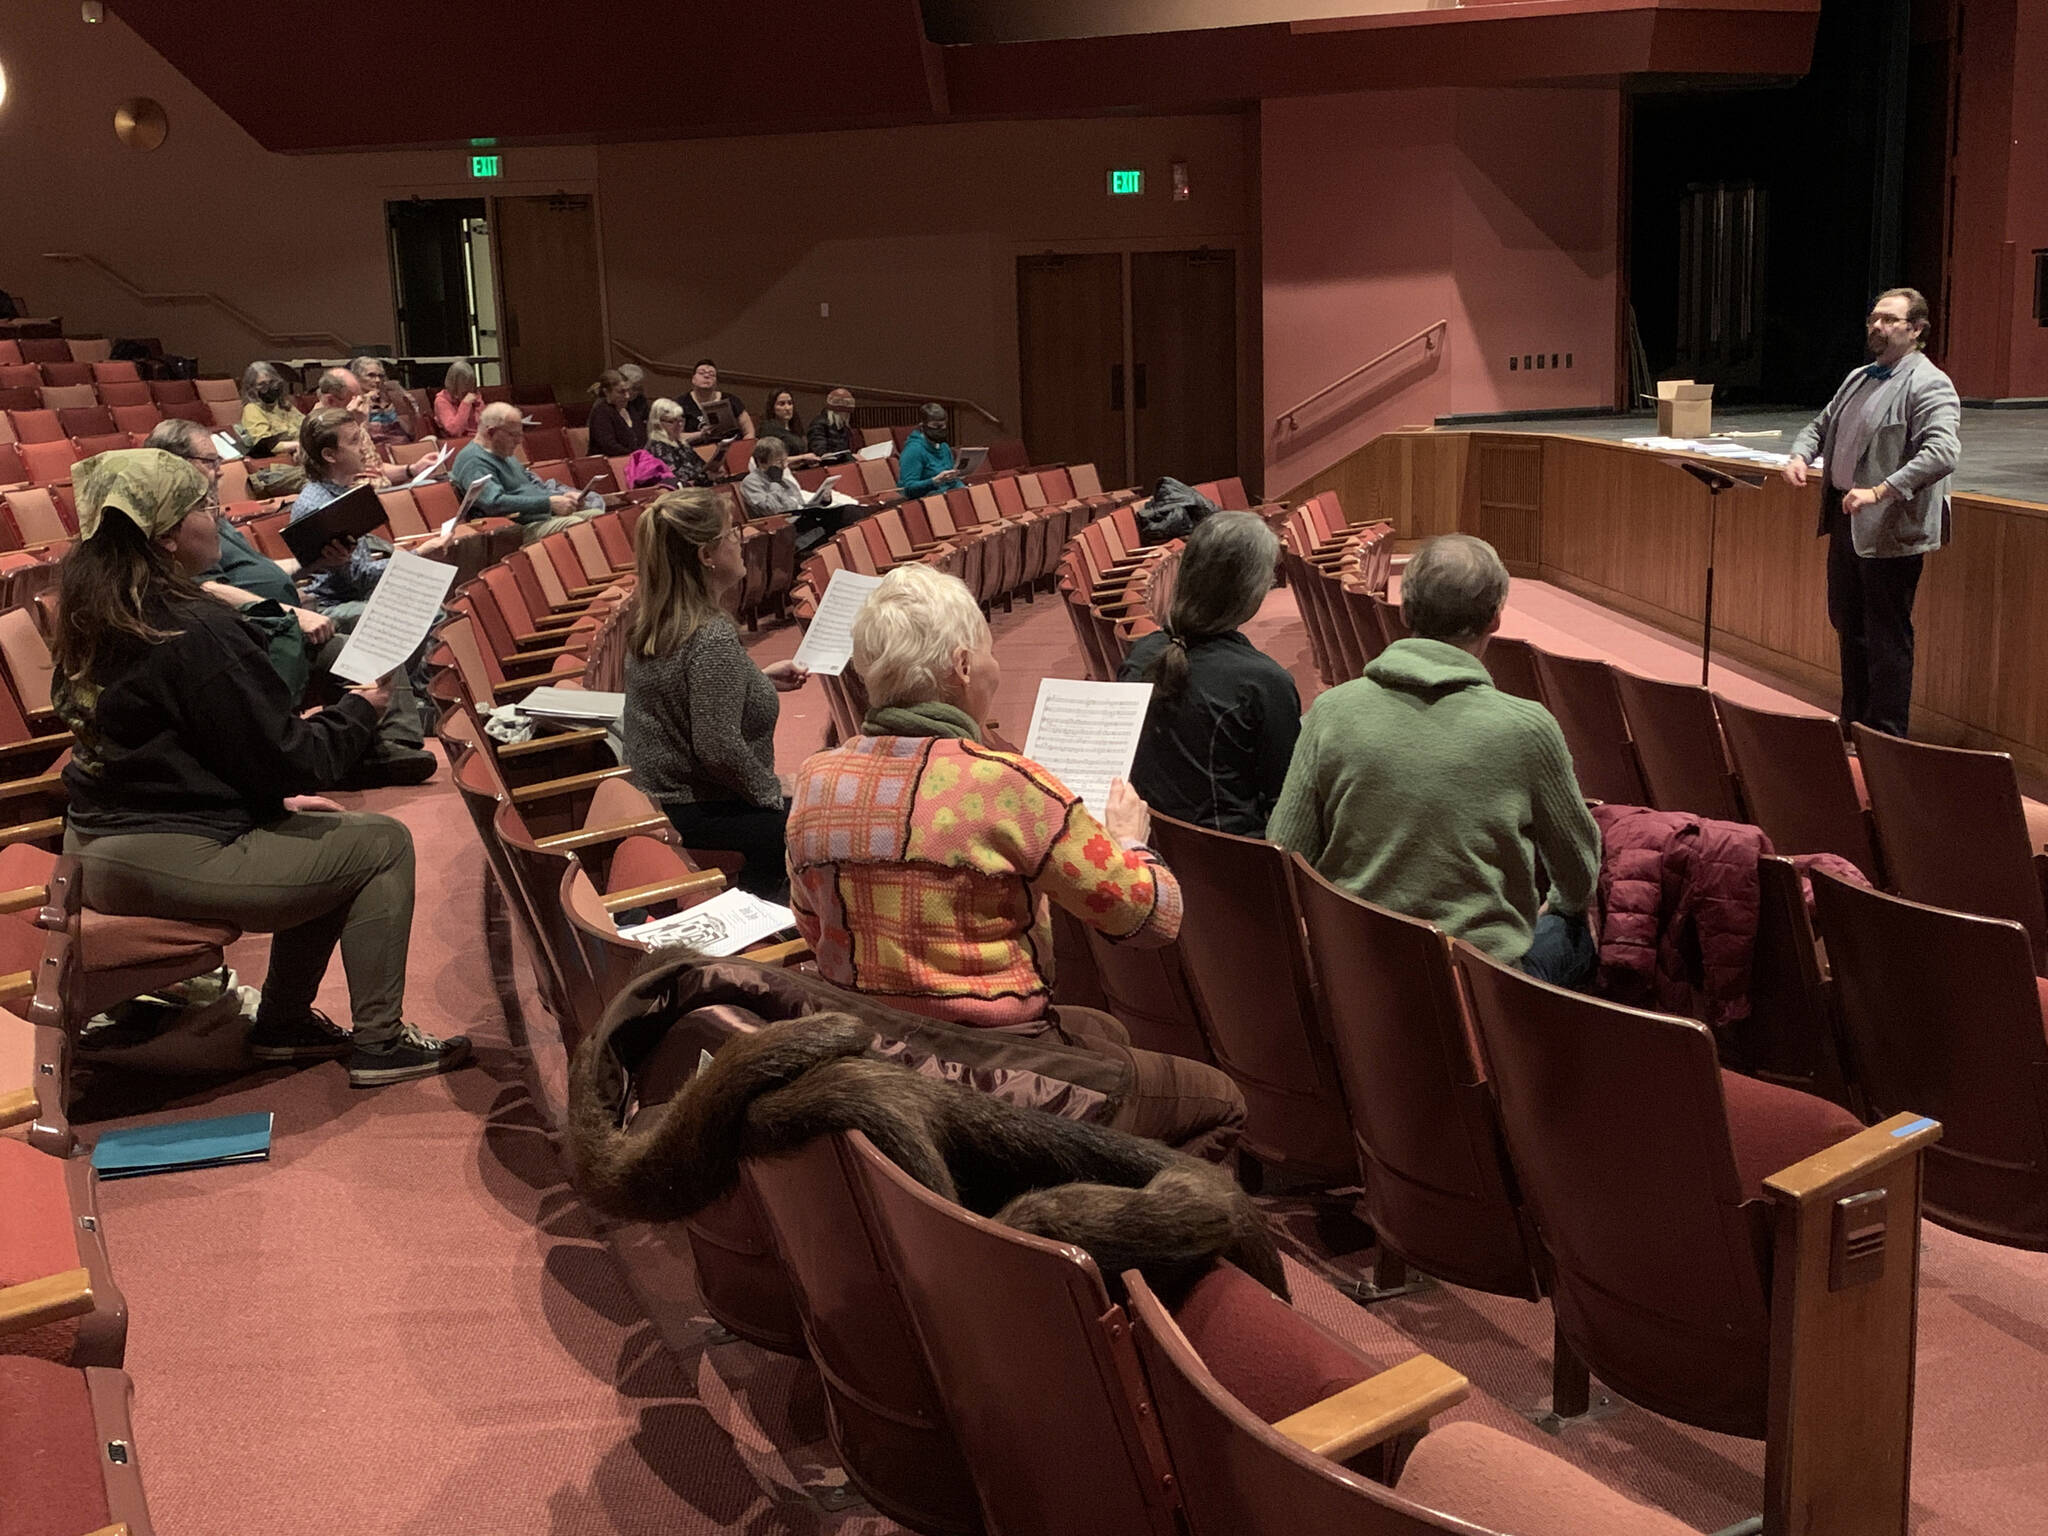 Photo by Christina Whiting/Homer News
Kyle Schneider instructs community members during Feb. 21 community chorus at the Mariner Theatre.